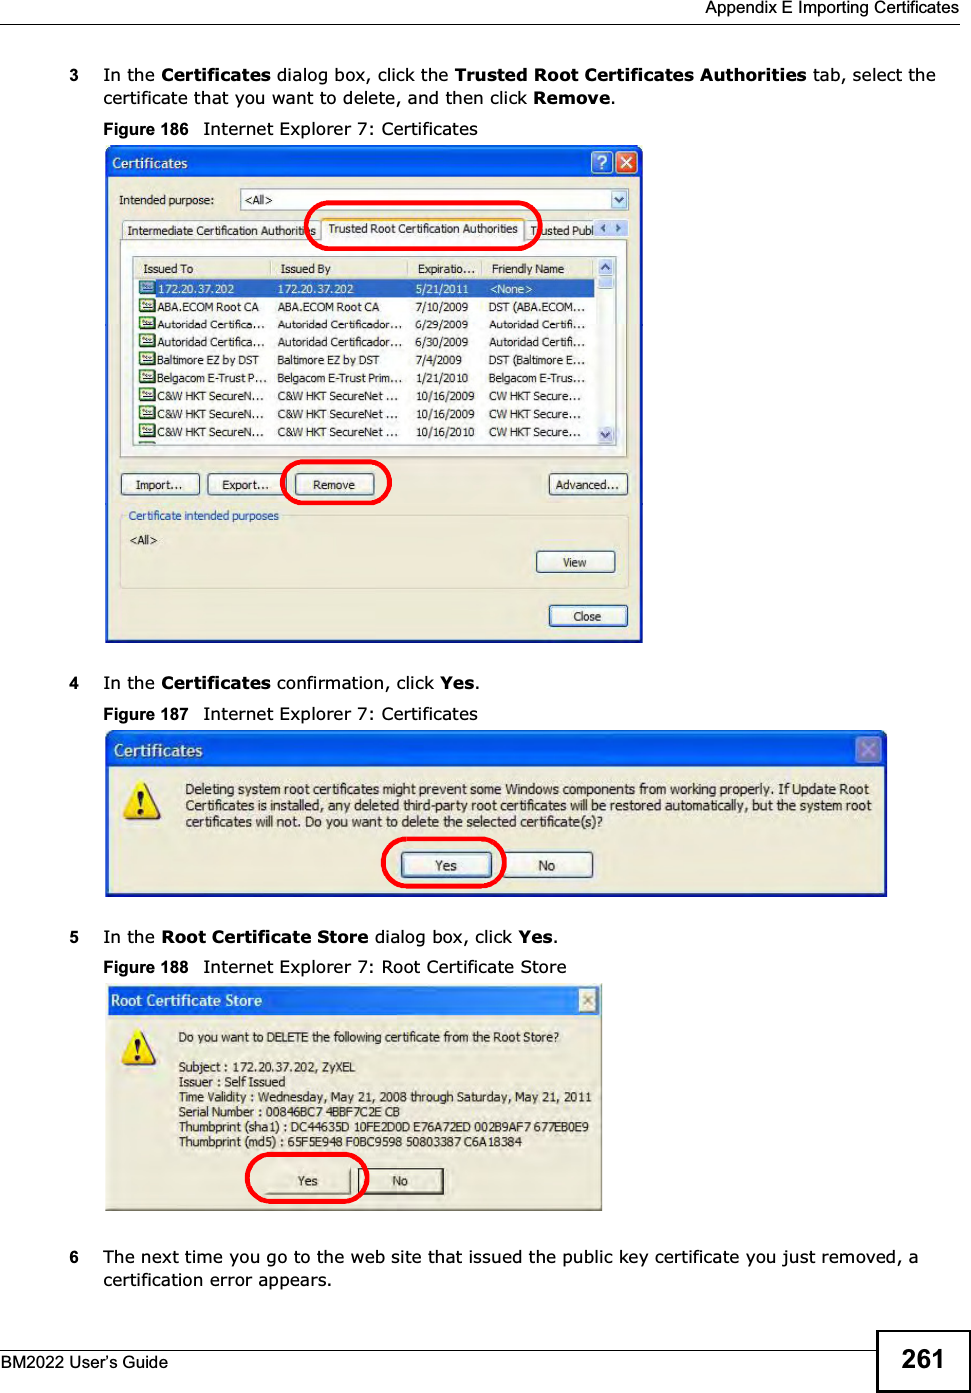  Appendix E Importing CertificatesBM2022 Users Guide 2613In the Certificates dialog box, click the Trusted Root Certificates Authorities tab, select the certificate that you want to delete, and then click Remove.Figure 186   Internet Explorer 7: Certificates4In the Certificates confirmation, click Yes.Figure 187   Internet Explorer 7: Certificates5In the Root Certificate Store dialog box, click Yes.Figure 188   Internet Explorer 7: Root Certificate Store6The next time you go to the web site that issued the public key certificate you just removed, a certification error appears.